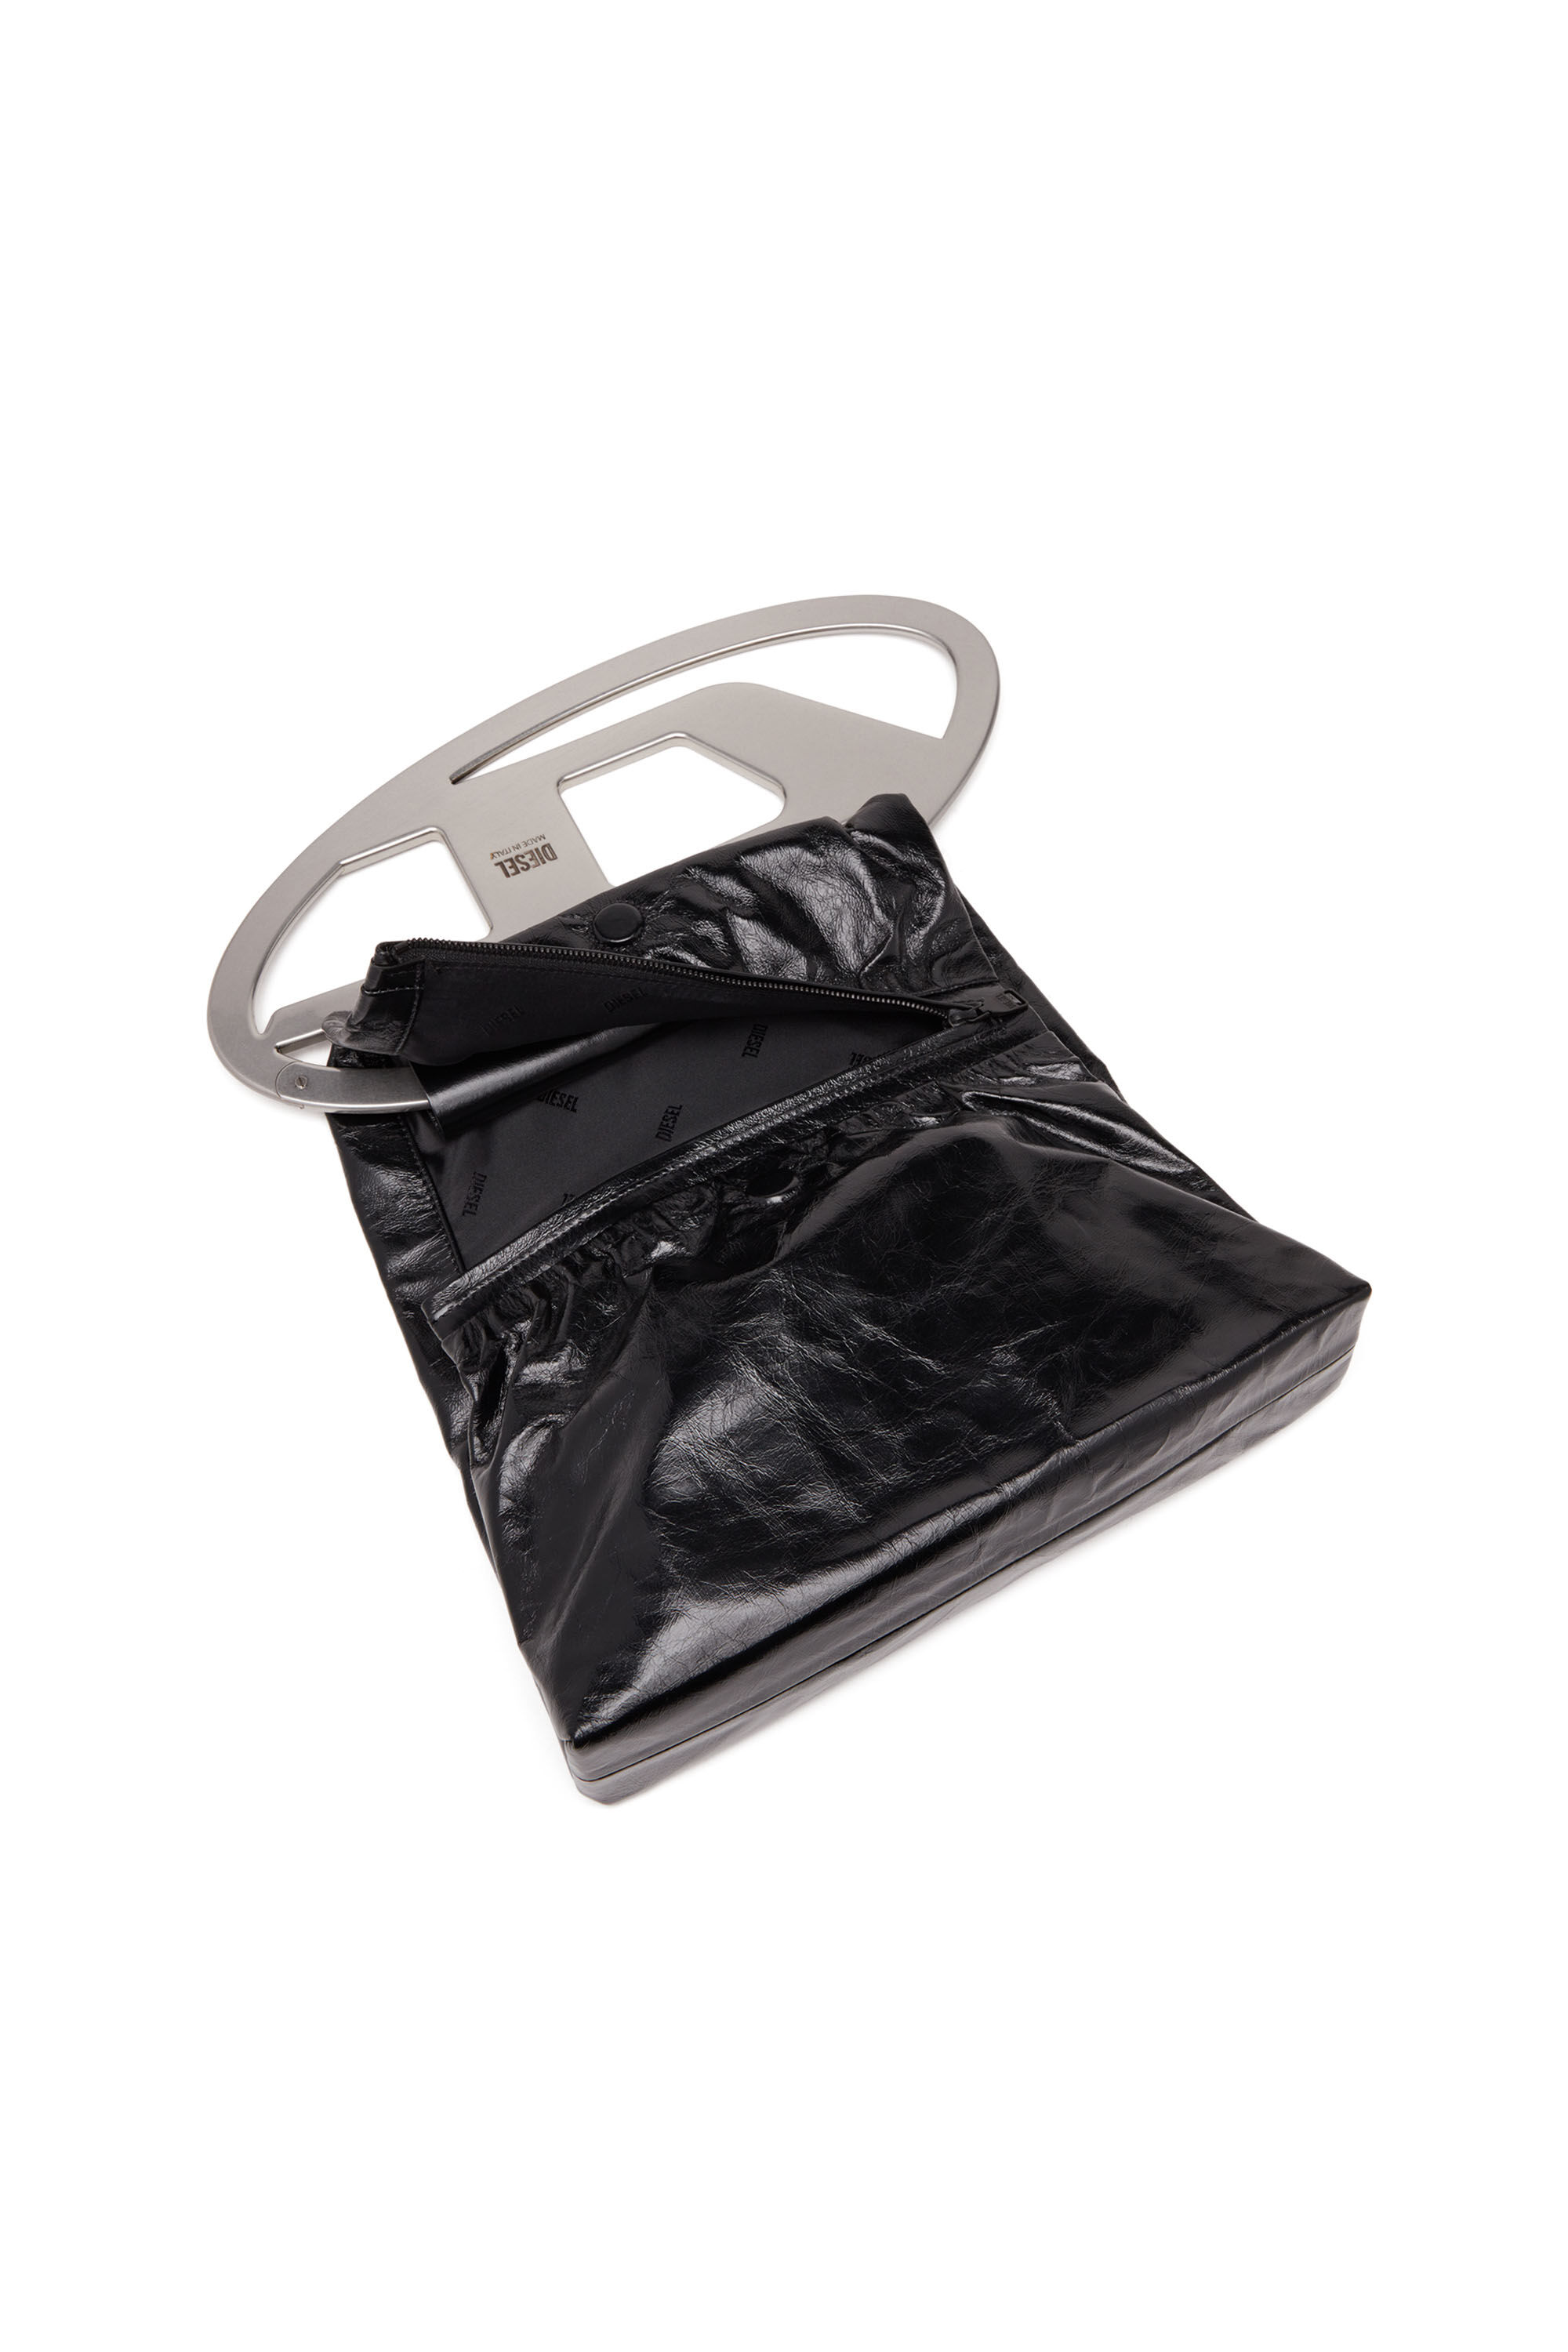 Diesel - BIG-D POUCH, Female Big-D-Clutch bag in crinkled leather in ブラック - Image 5